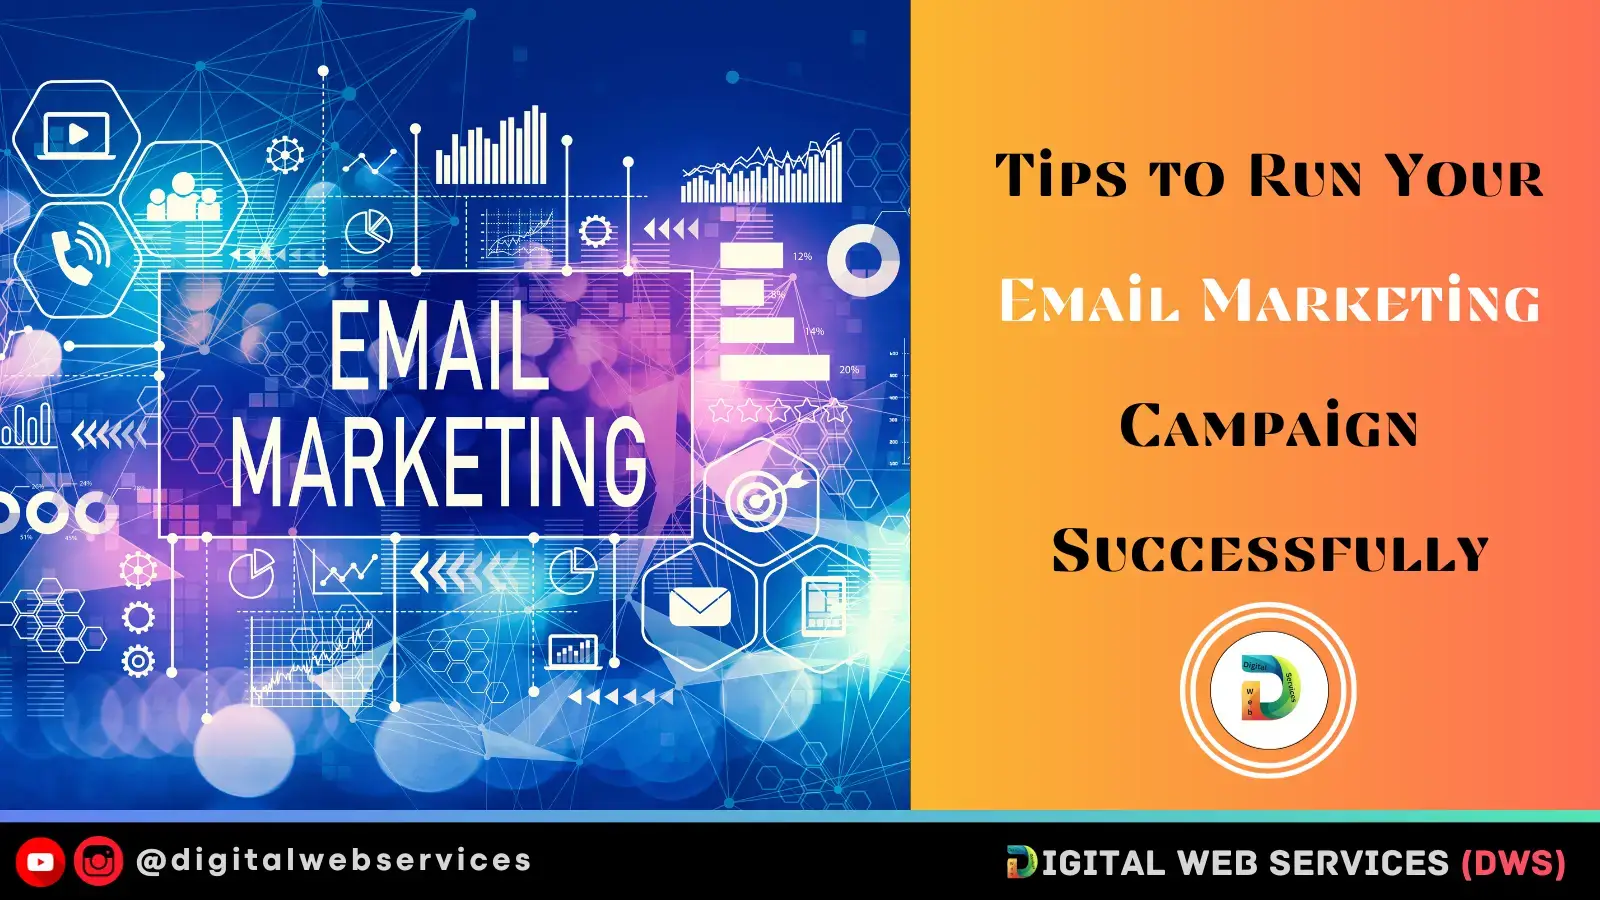 3 Tips to Run Your Email Marketing Campaign Successfully